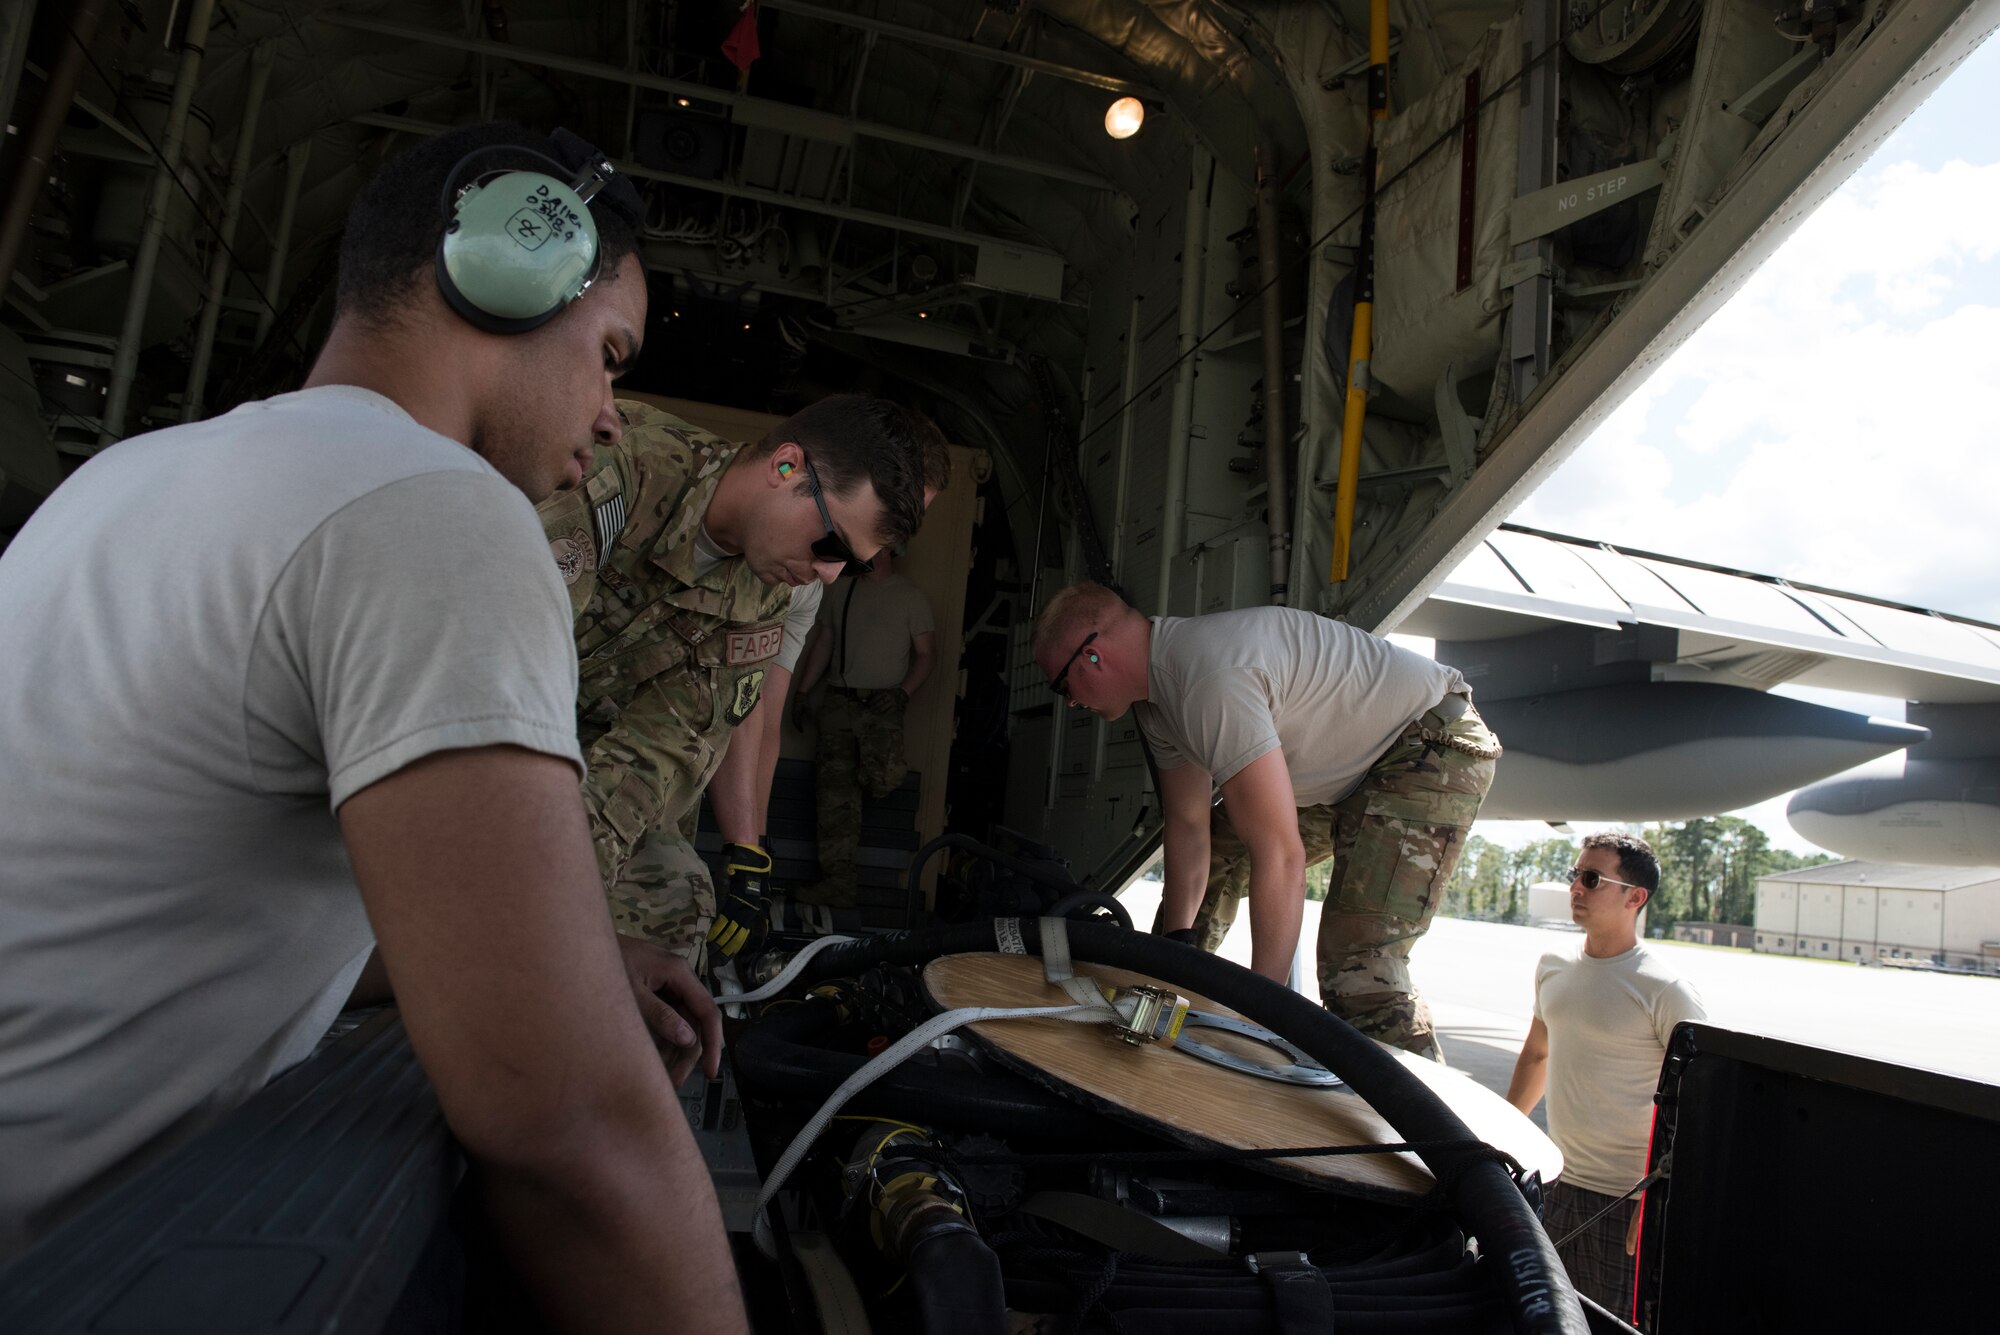 Airmen from the 71st Rescue Squadron and 723rd Aircraft Maintenance Squadron slide equipment onto a HC-130J Combat King II, Sept. 15, 2018, at Moody Air Force Base, Ga. The 334th Air Expeditionary Group launched HC-130J Combat King IIs, HH-60G Pavehawks, aircrew and support personnel to pre-position at Joint Base Charleston, S.C., for potential Tropical Storm Florence response. Under the command of Col. John Creel, the 374th Rescue Group commander, the AEG integrated to make one expeditionary search and rescue unit comprised of rescue and support personnel from both the 23d Wing, 920th Rescue Wing at Patrick Air Force Base, Fla., and 51st Communications Squadron at Warner Robins Air Force Base, Ga.  (U.S. Air Force photo by Staff Sgt. Eric Summers Jr.)